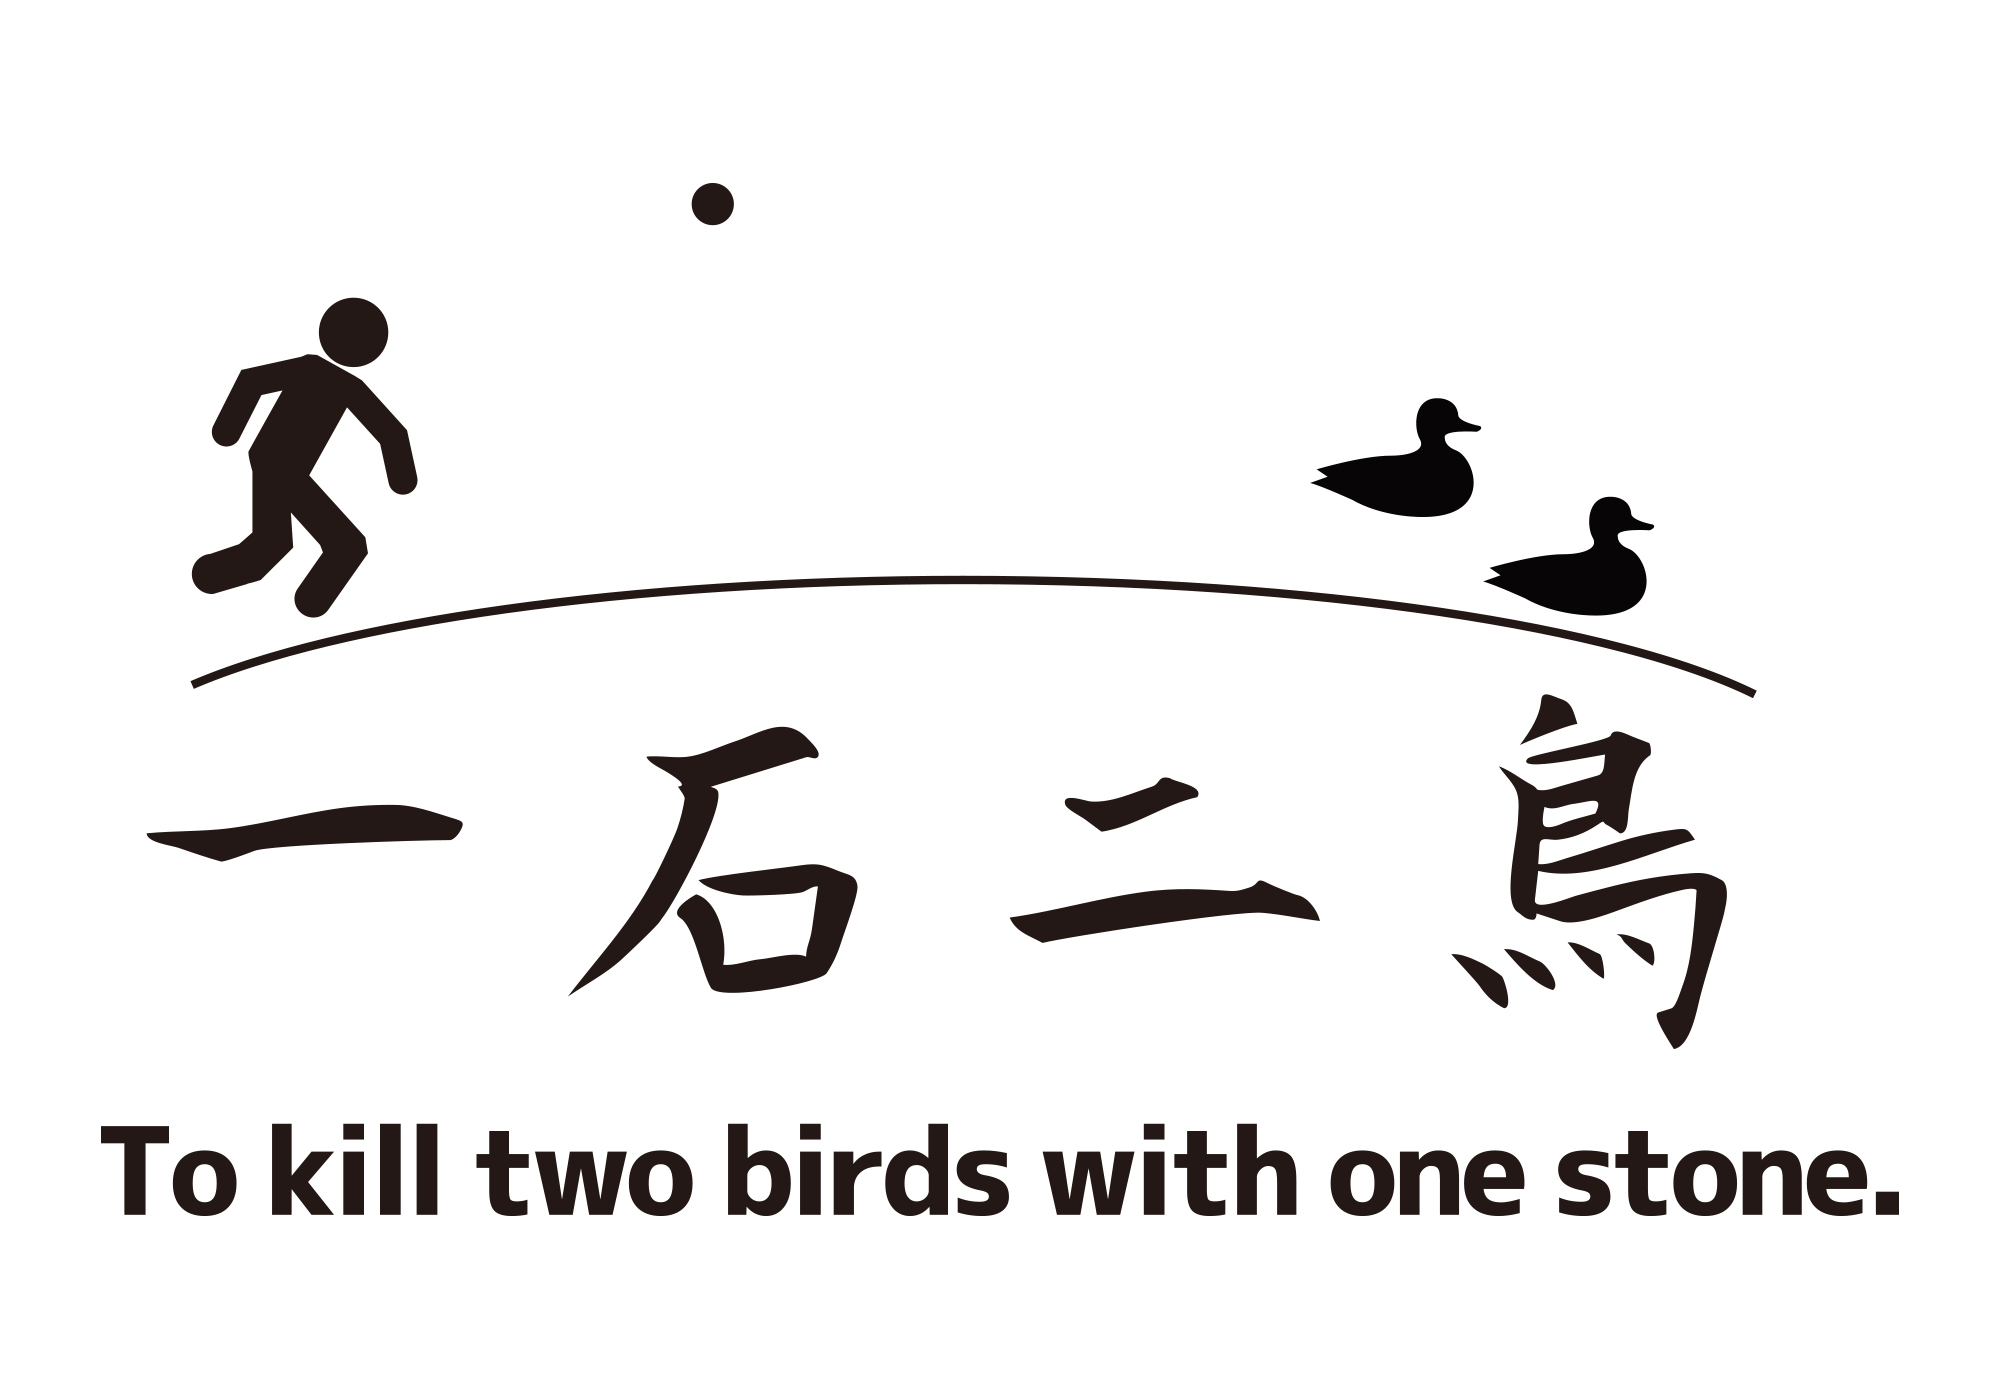 Kill two birds with one stone / 一石二鳥 [idiom] All free Download Japanese  KANJI Design Art | ORIGAMI Japan